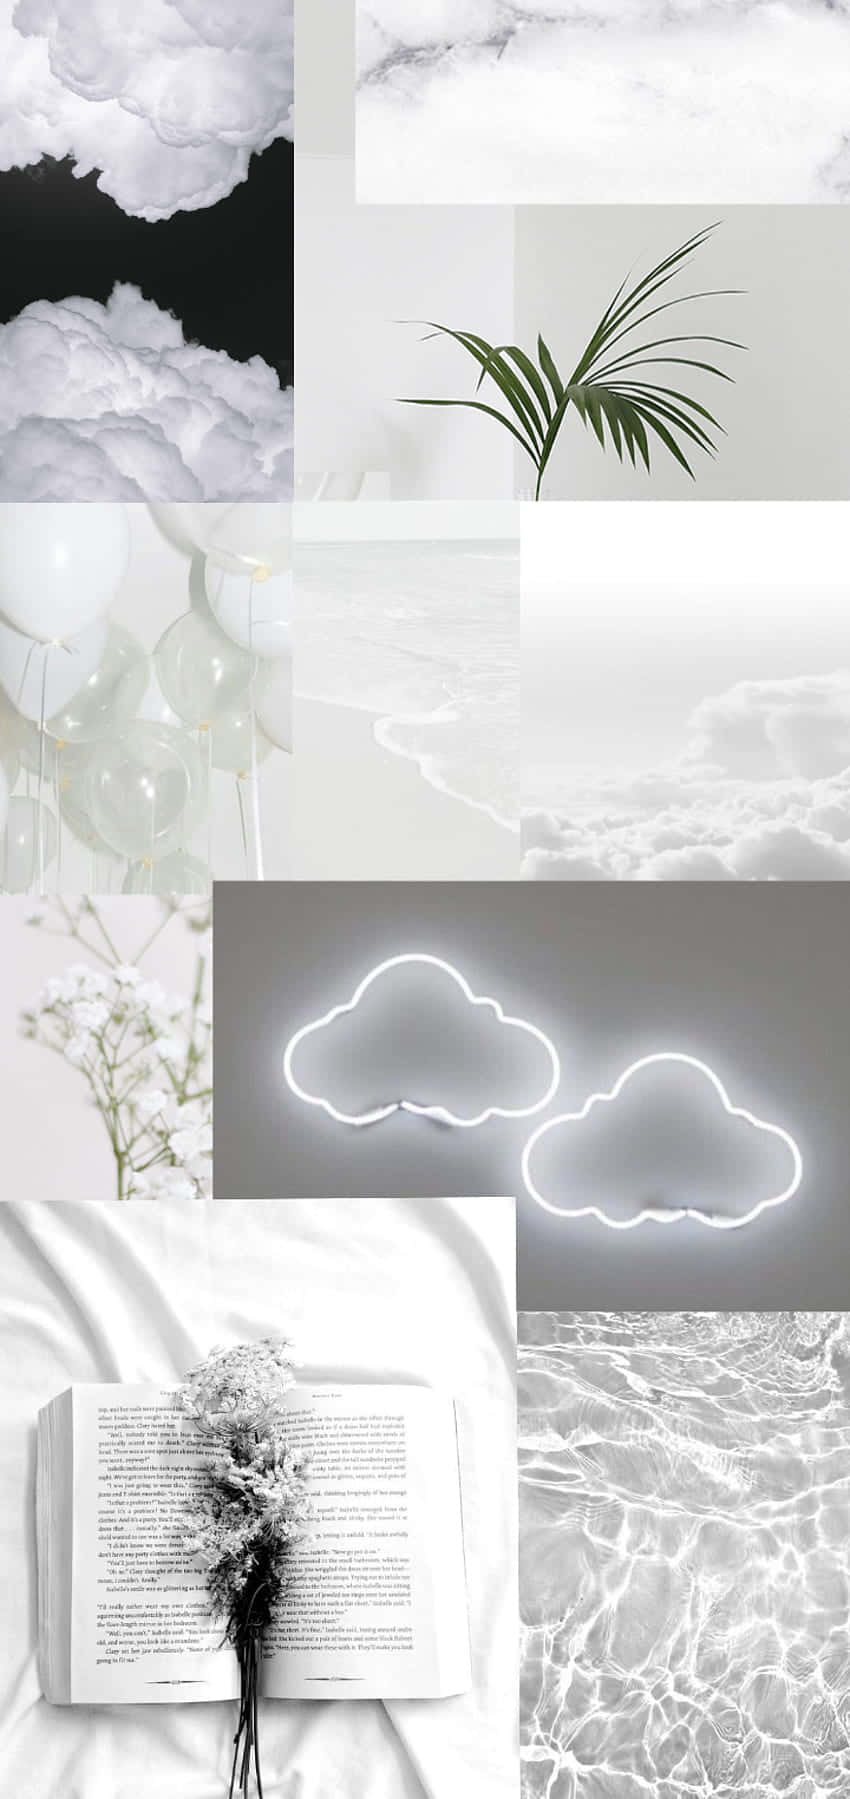 Free Soft White Aesthetic Wallpaper Downloads, Soft White Aesthetic Wallpaper for FREE